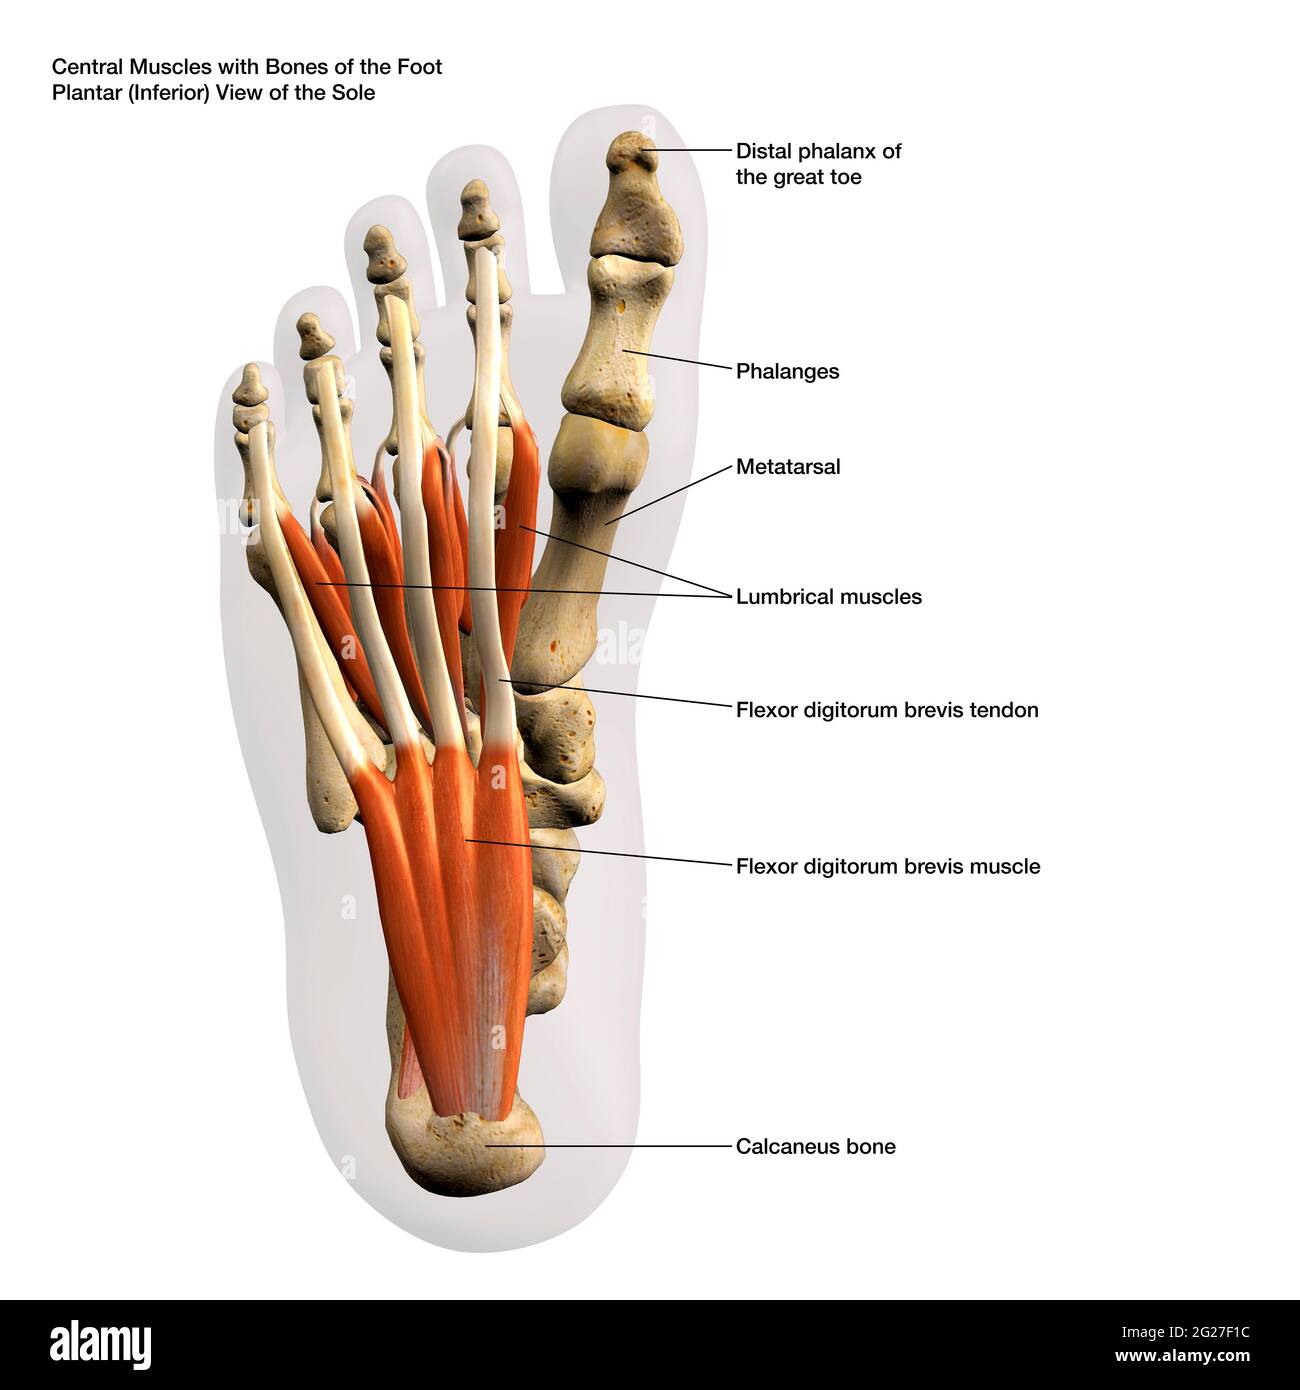 3D rendering of the central muscles and bones of the human foot, with labels. Stock Photo